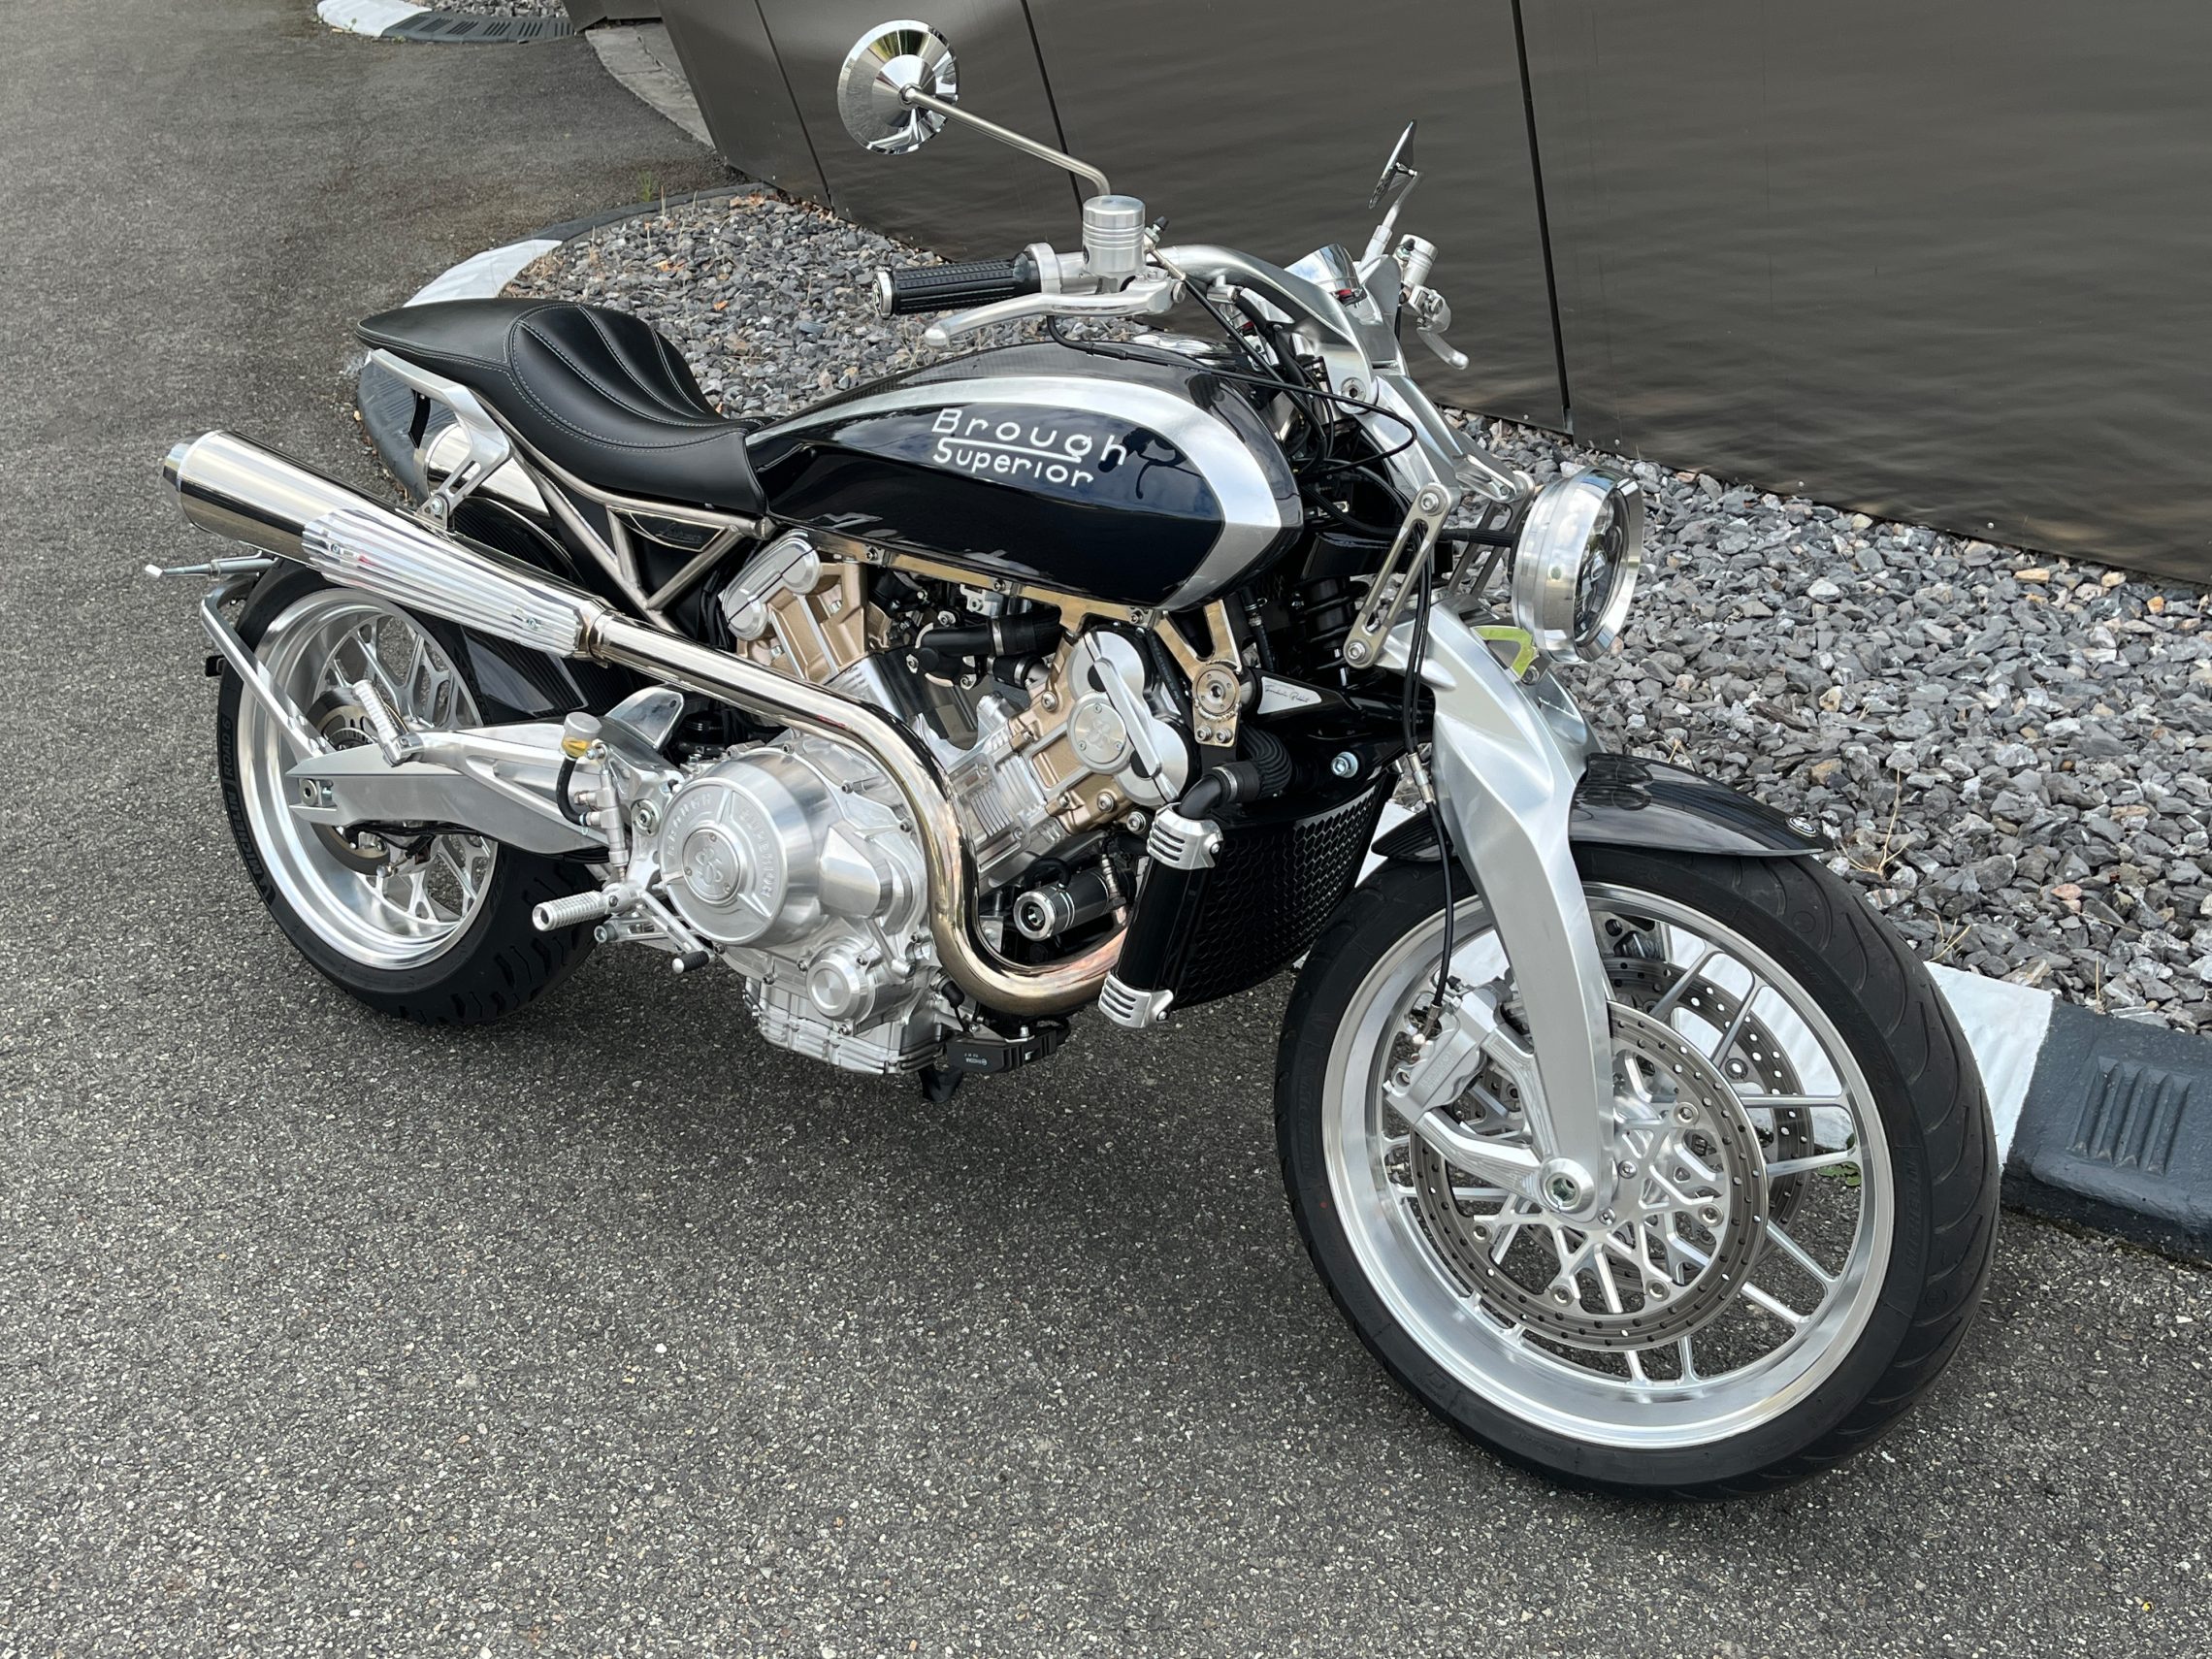 BROUGH SUPERIOR LAWRENCE ULTIMATE 1 of 19 for sale For Super Rich